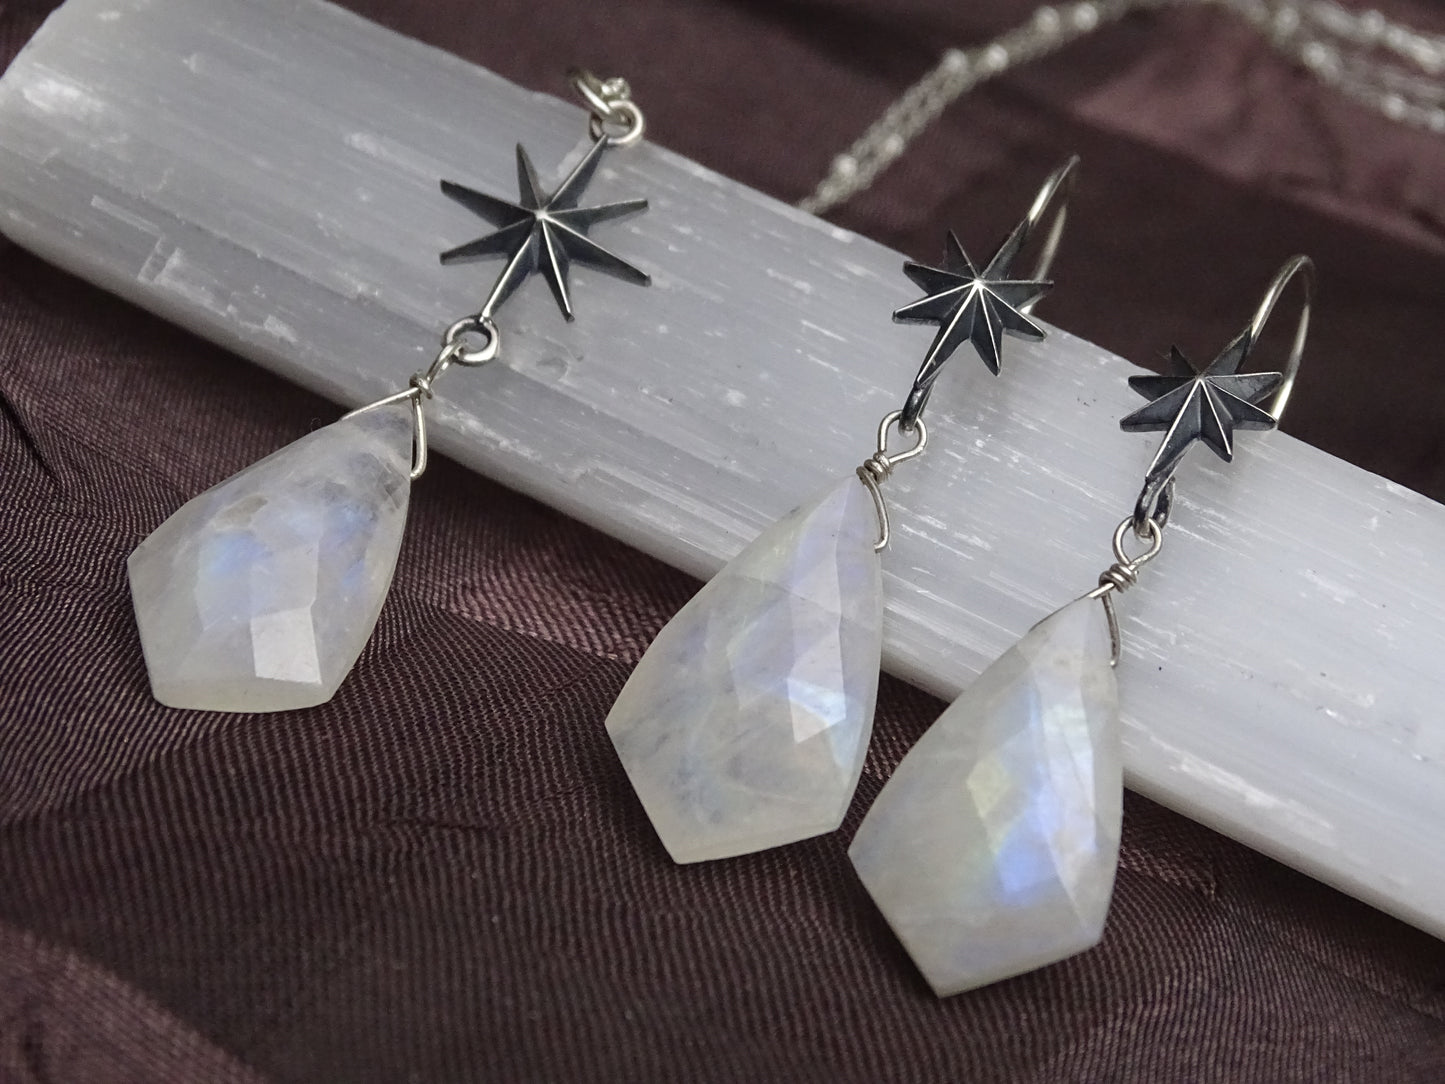 North Star Necklace and Earring Set